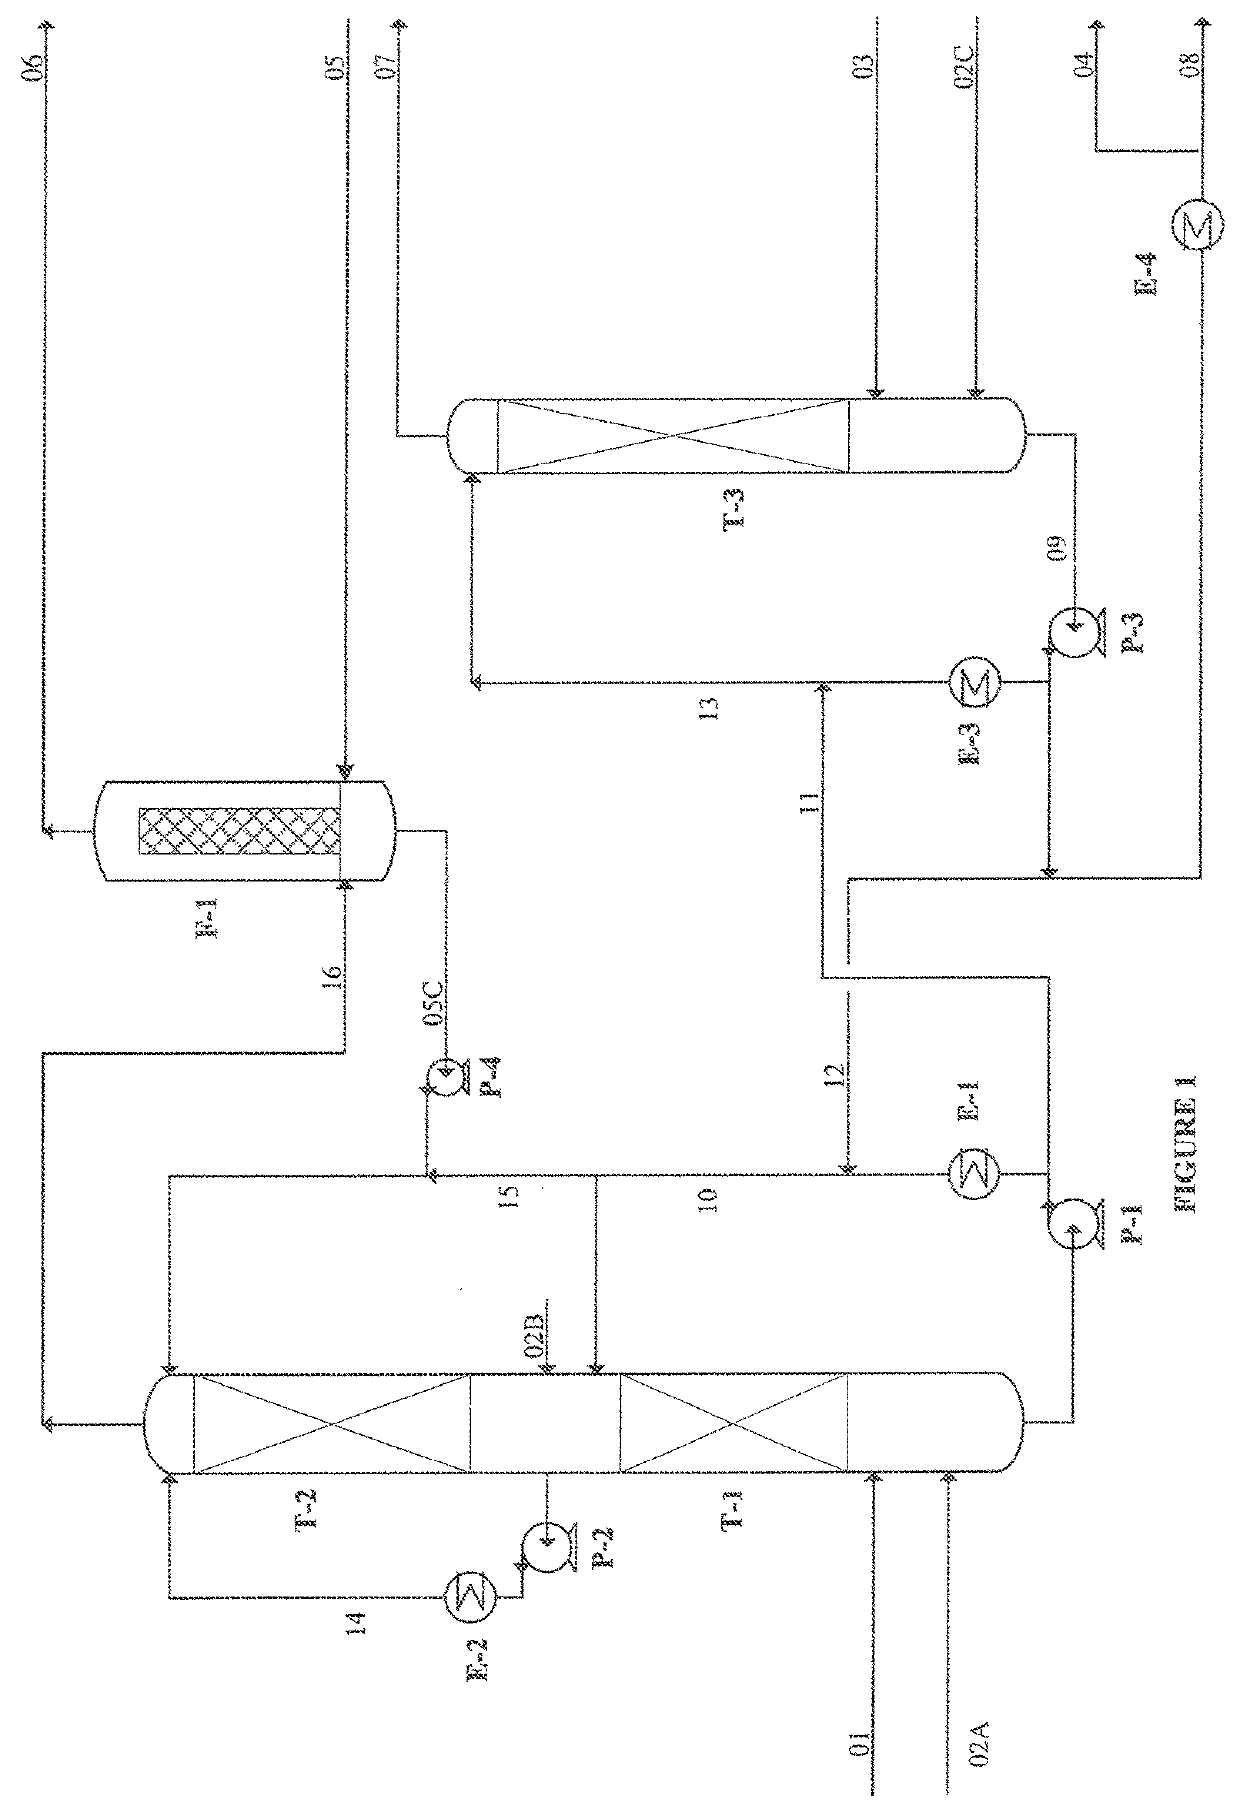 Sulfur dioxide scrubbing system and process for producing potassium products